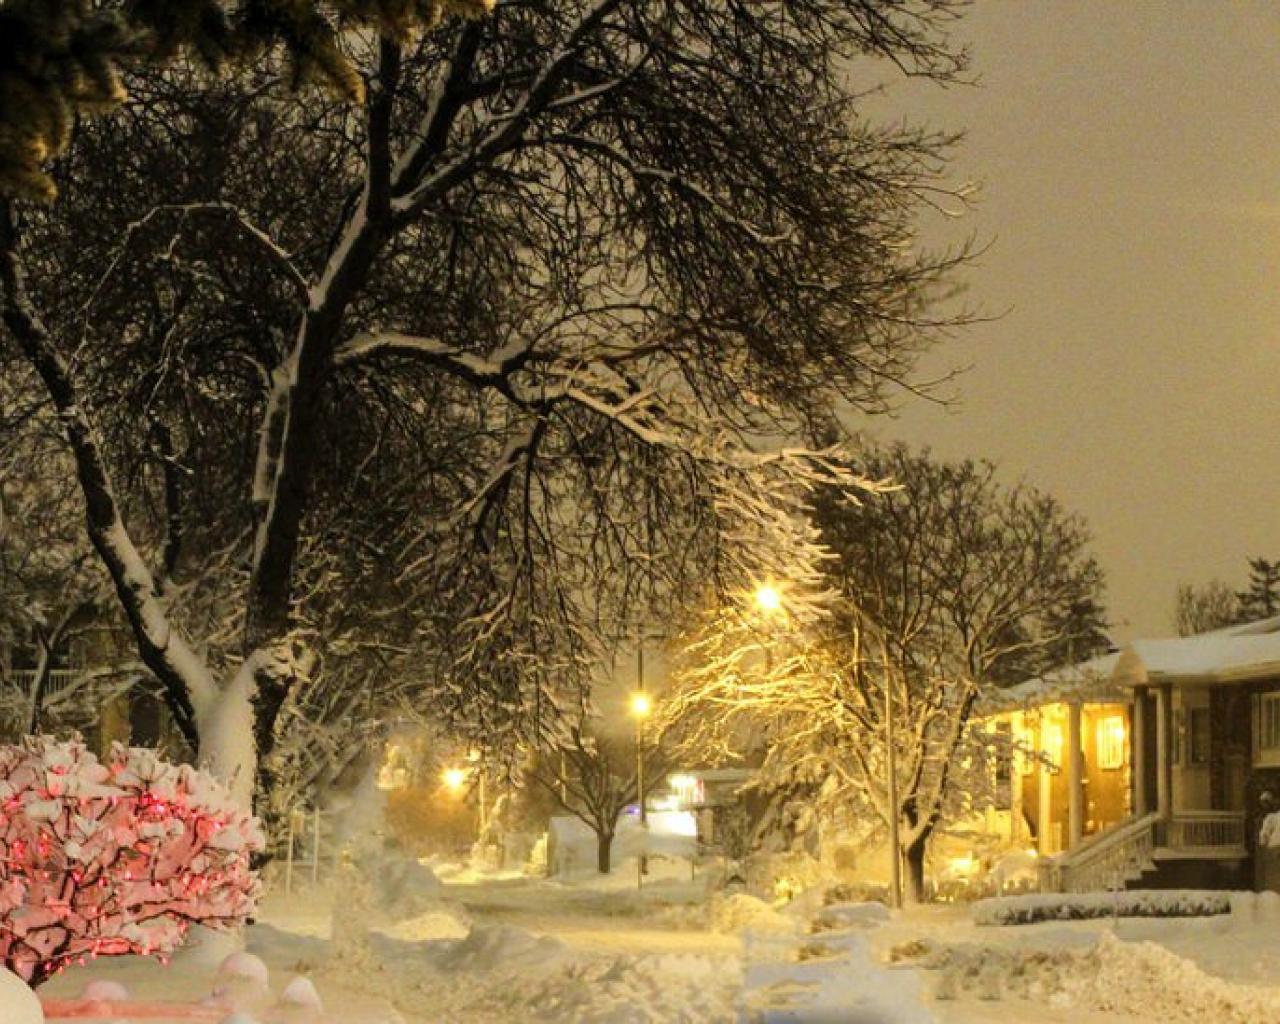 Winter storm and light before Christmas in Montreal, Quebec